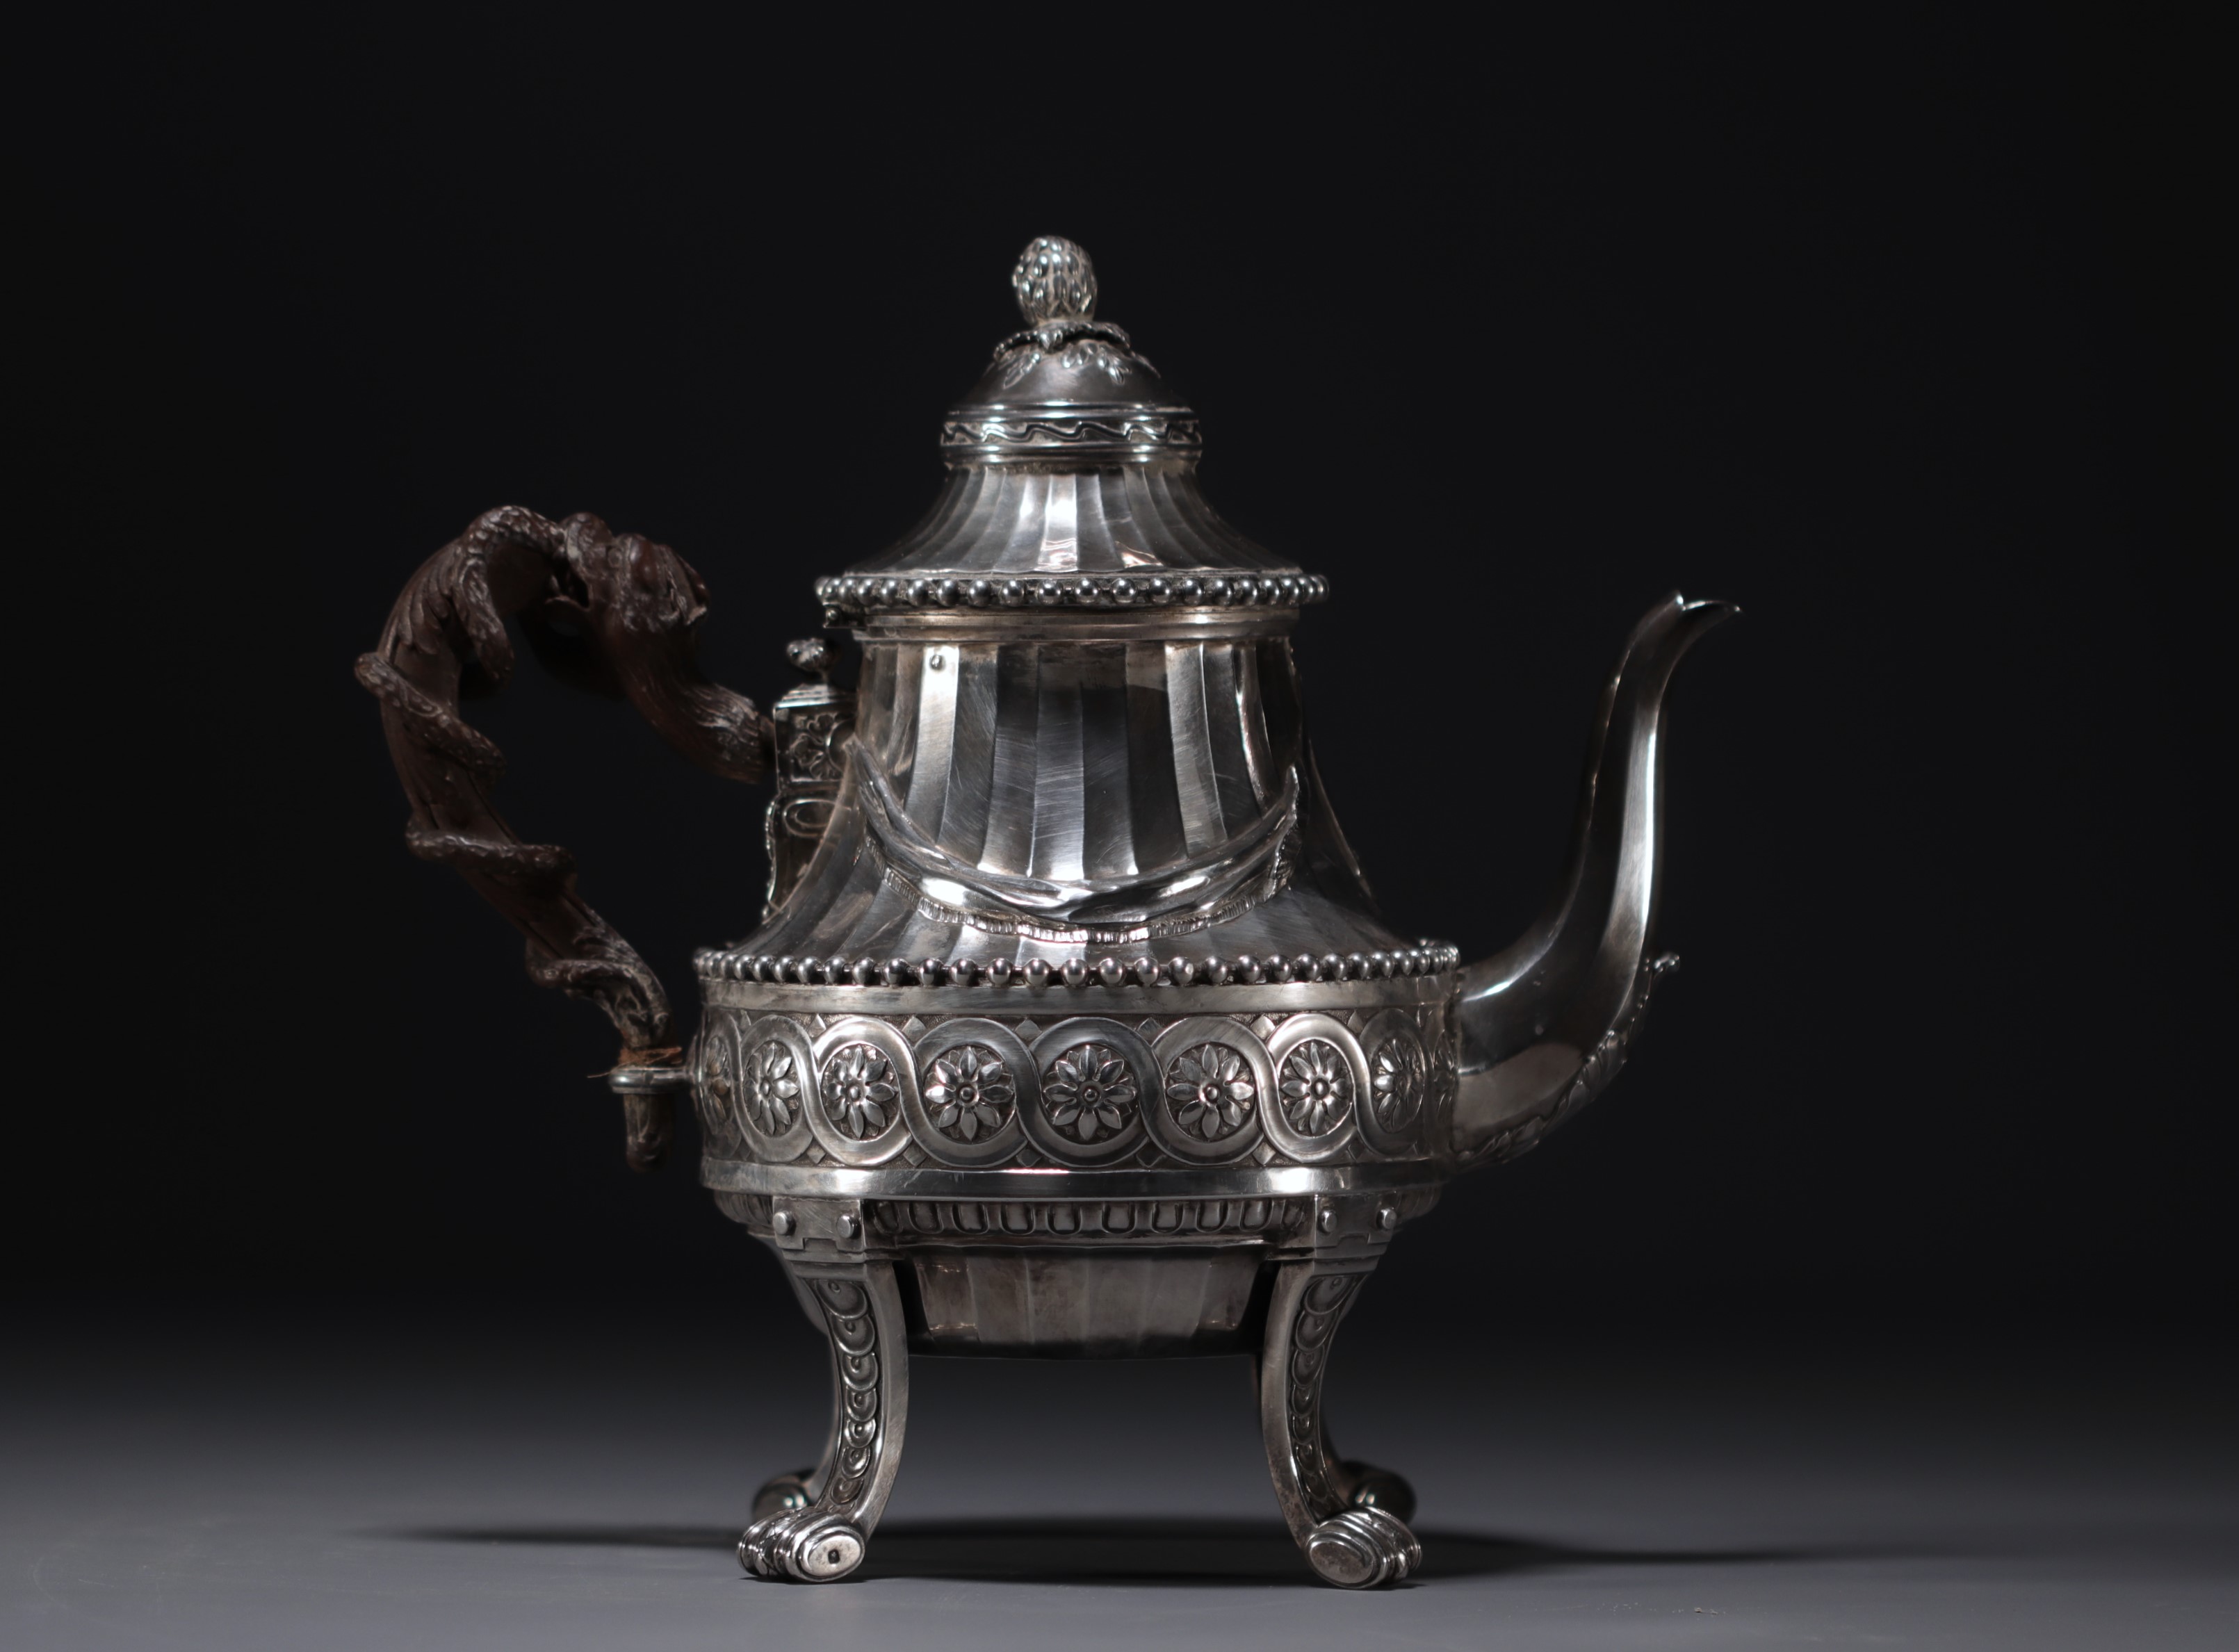 Antoine CARDEILHAC - Exceptional Regency-style solid silver service, 19th century. - Image 8 of 15